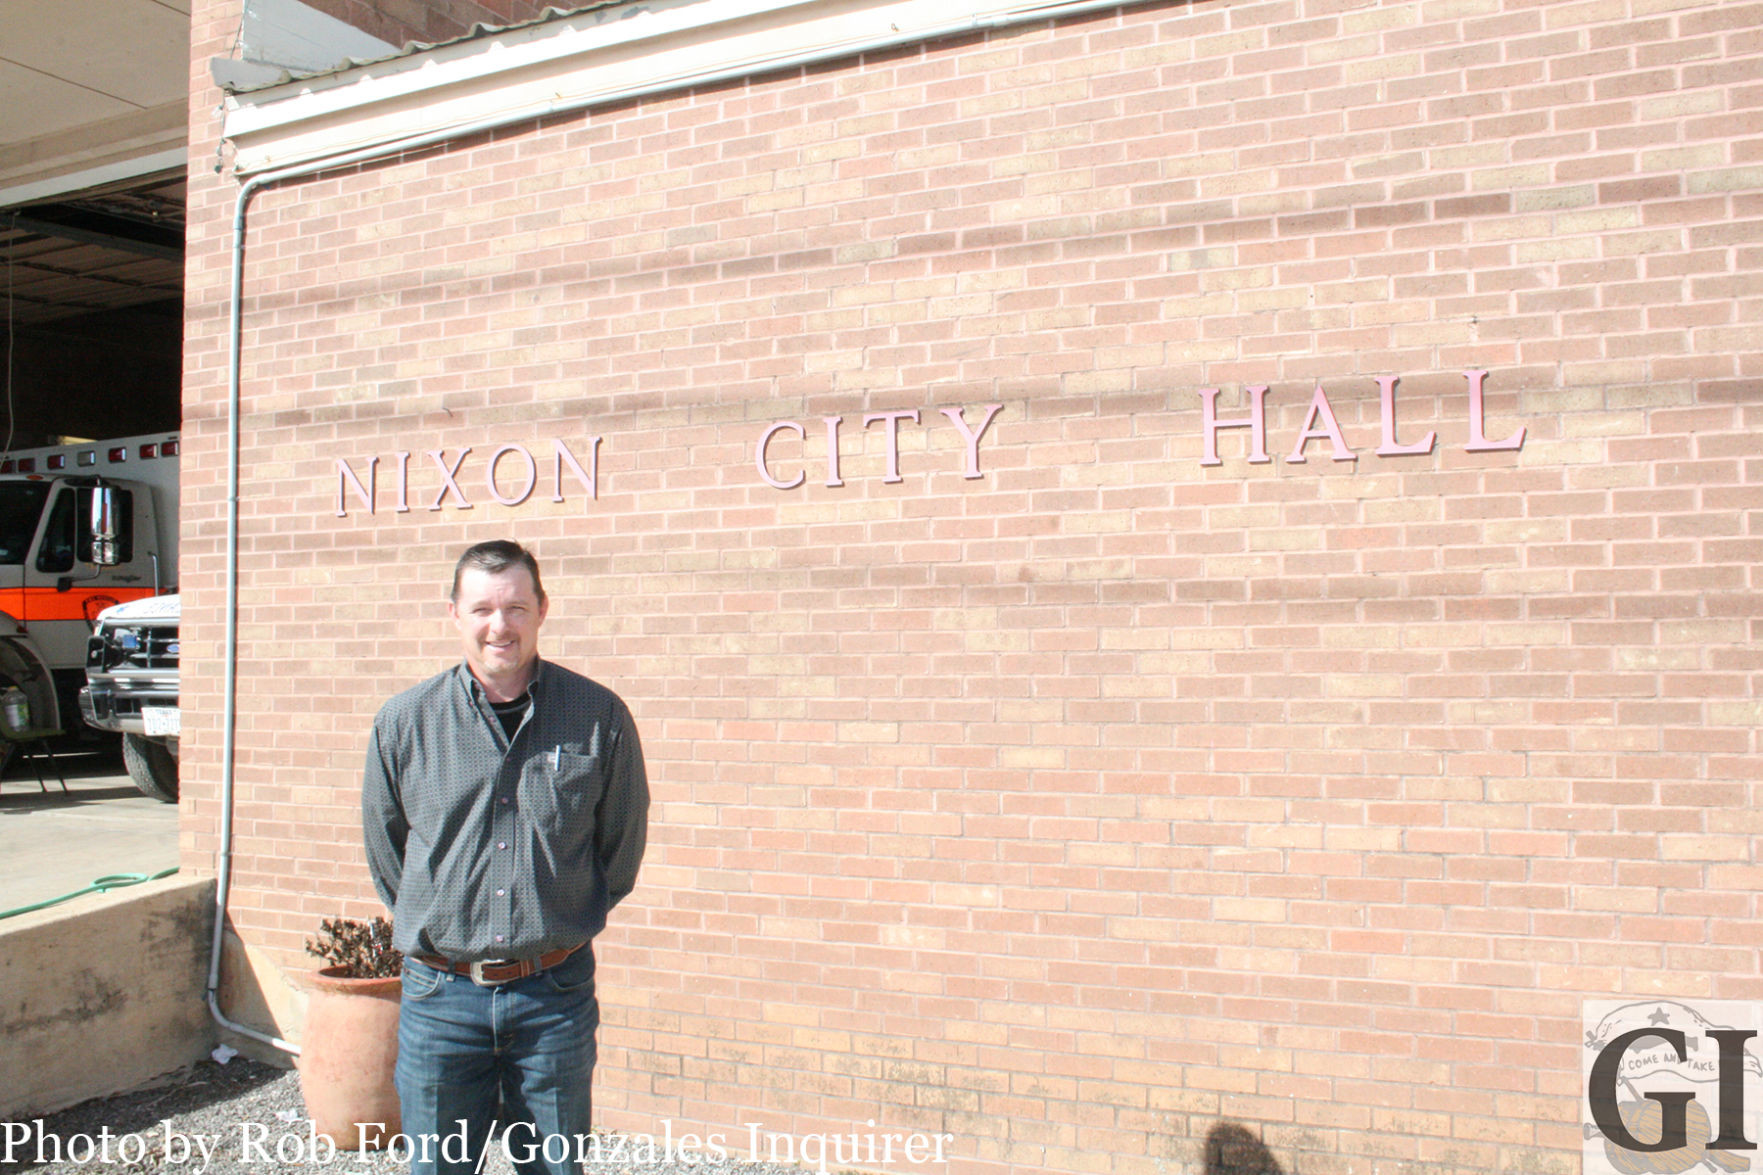 Nixon’s Harold Rice officially began his tenure as his city’s interim city administrator. Rice’s goal is to improve the city’s image as well as bring new businesses to town.